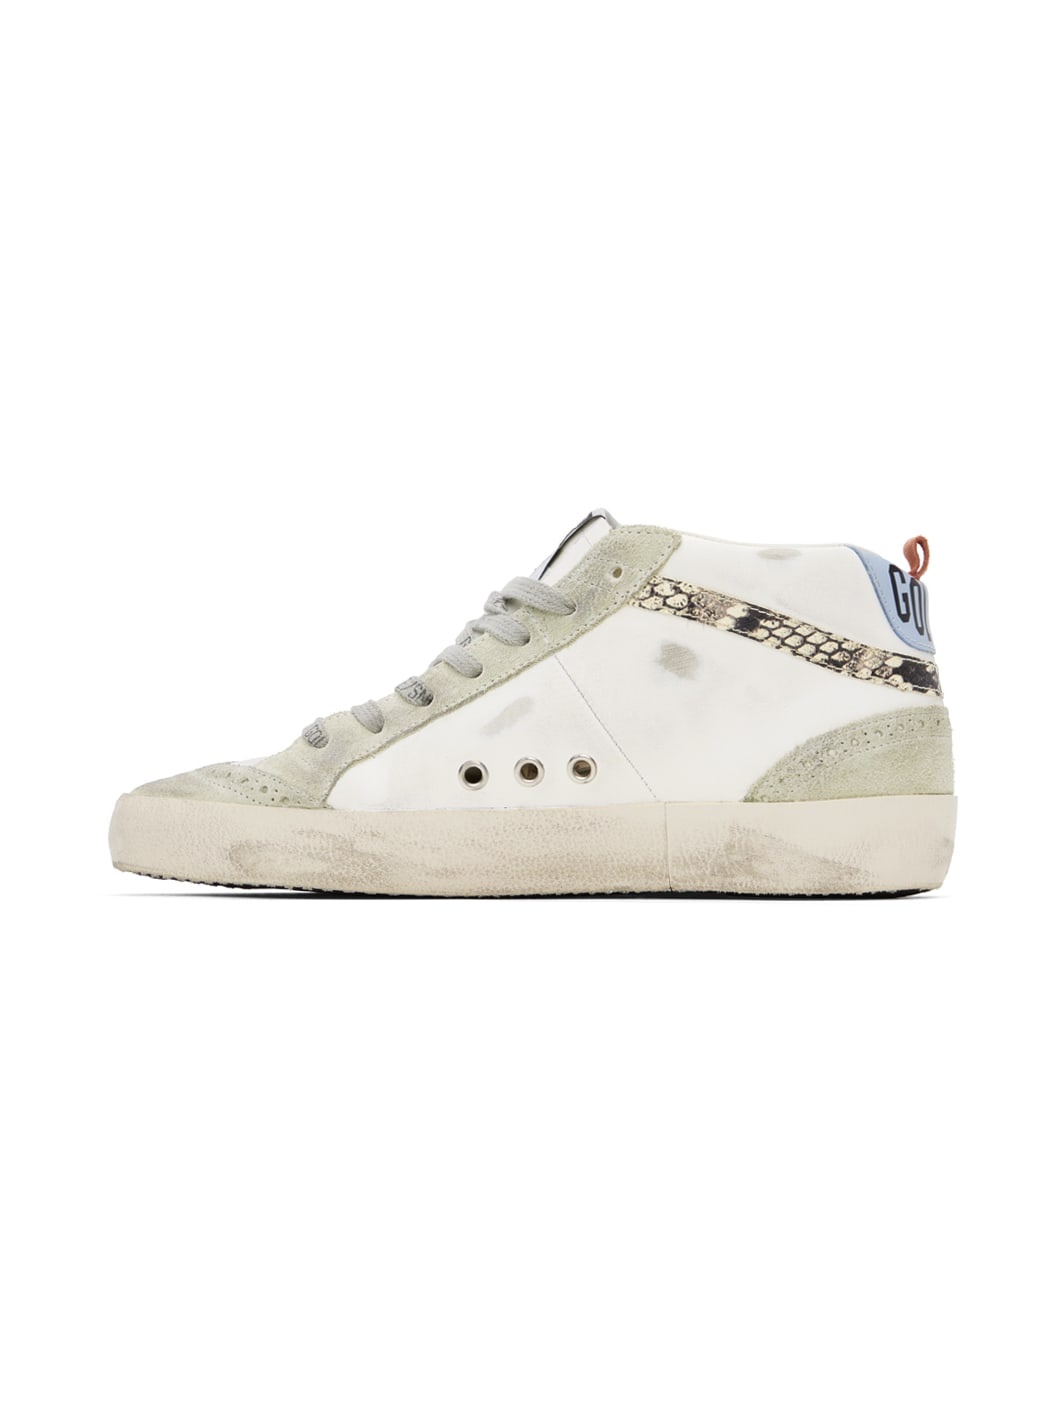 SSENSE Exclusive White & Gray Mid Star Sneakers - 3